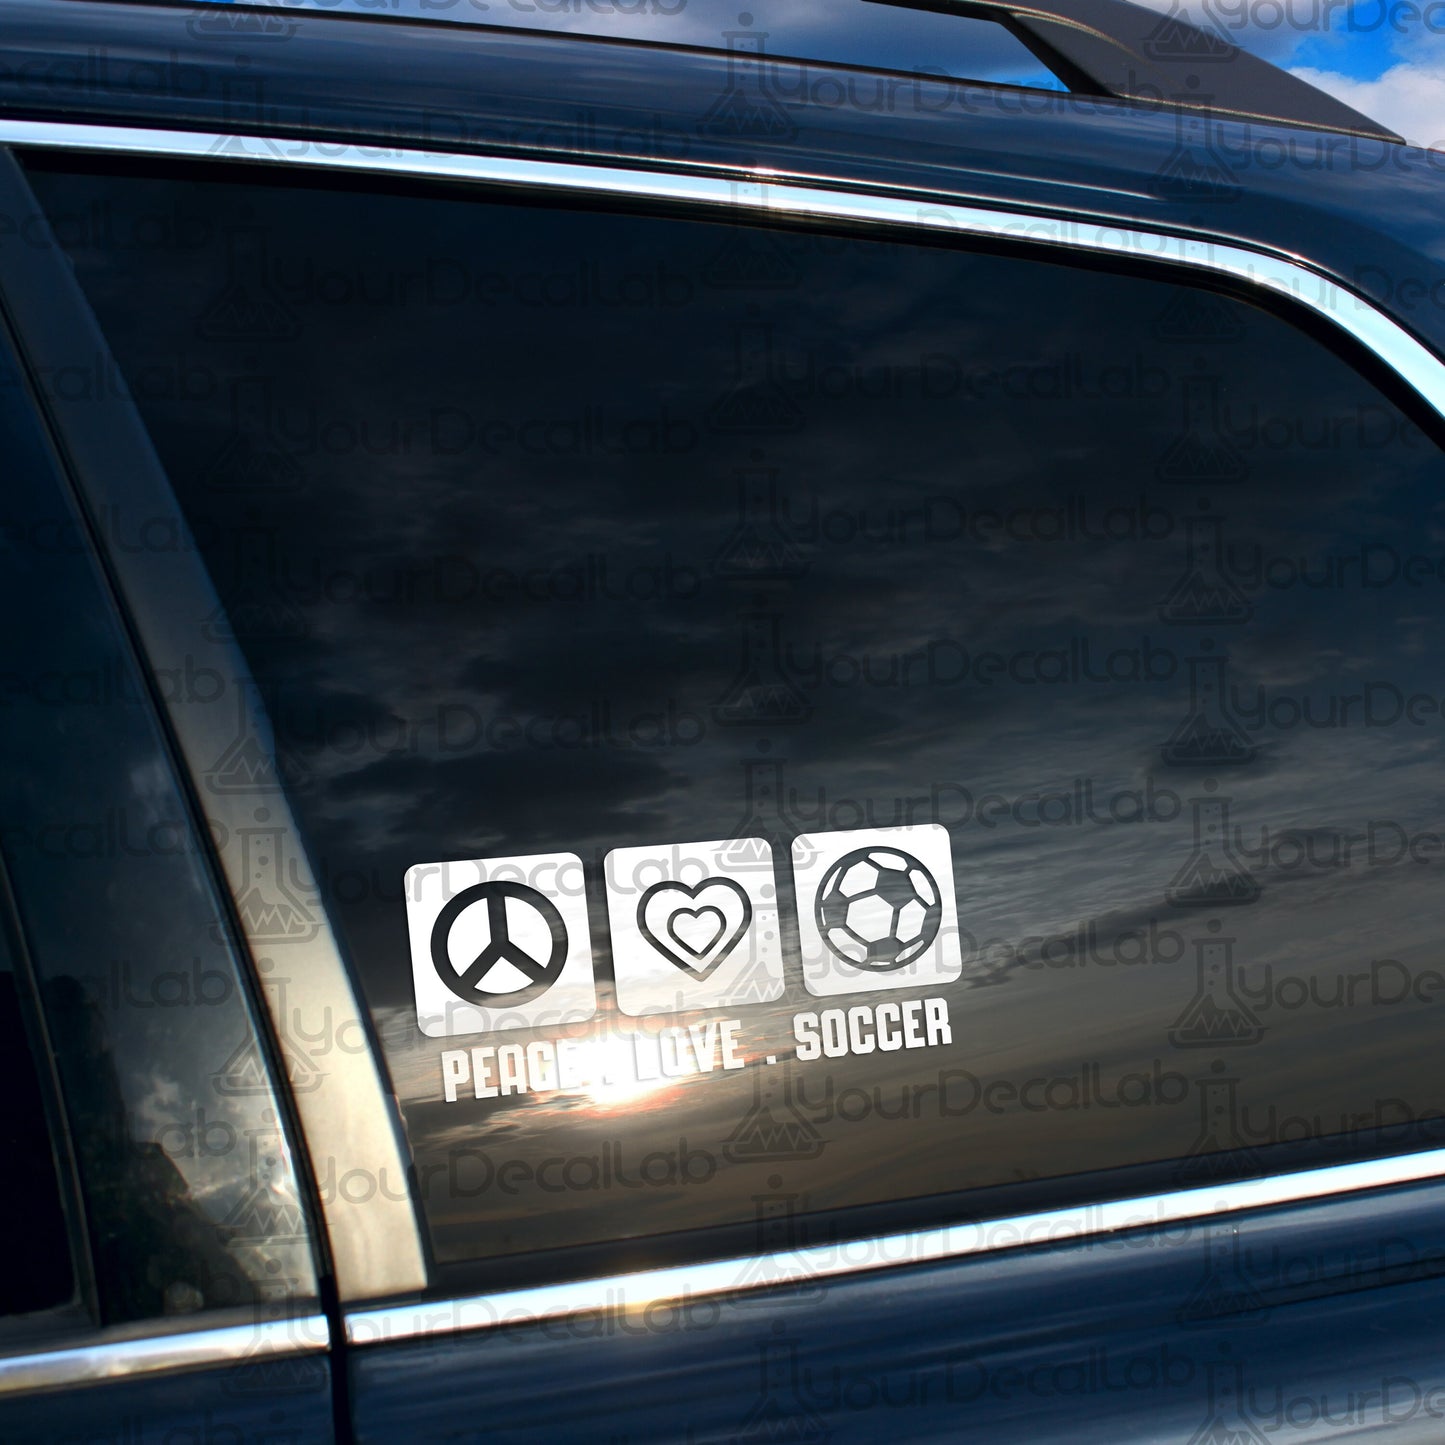 a car with a peace love soccer sticker on it